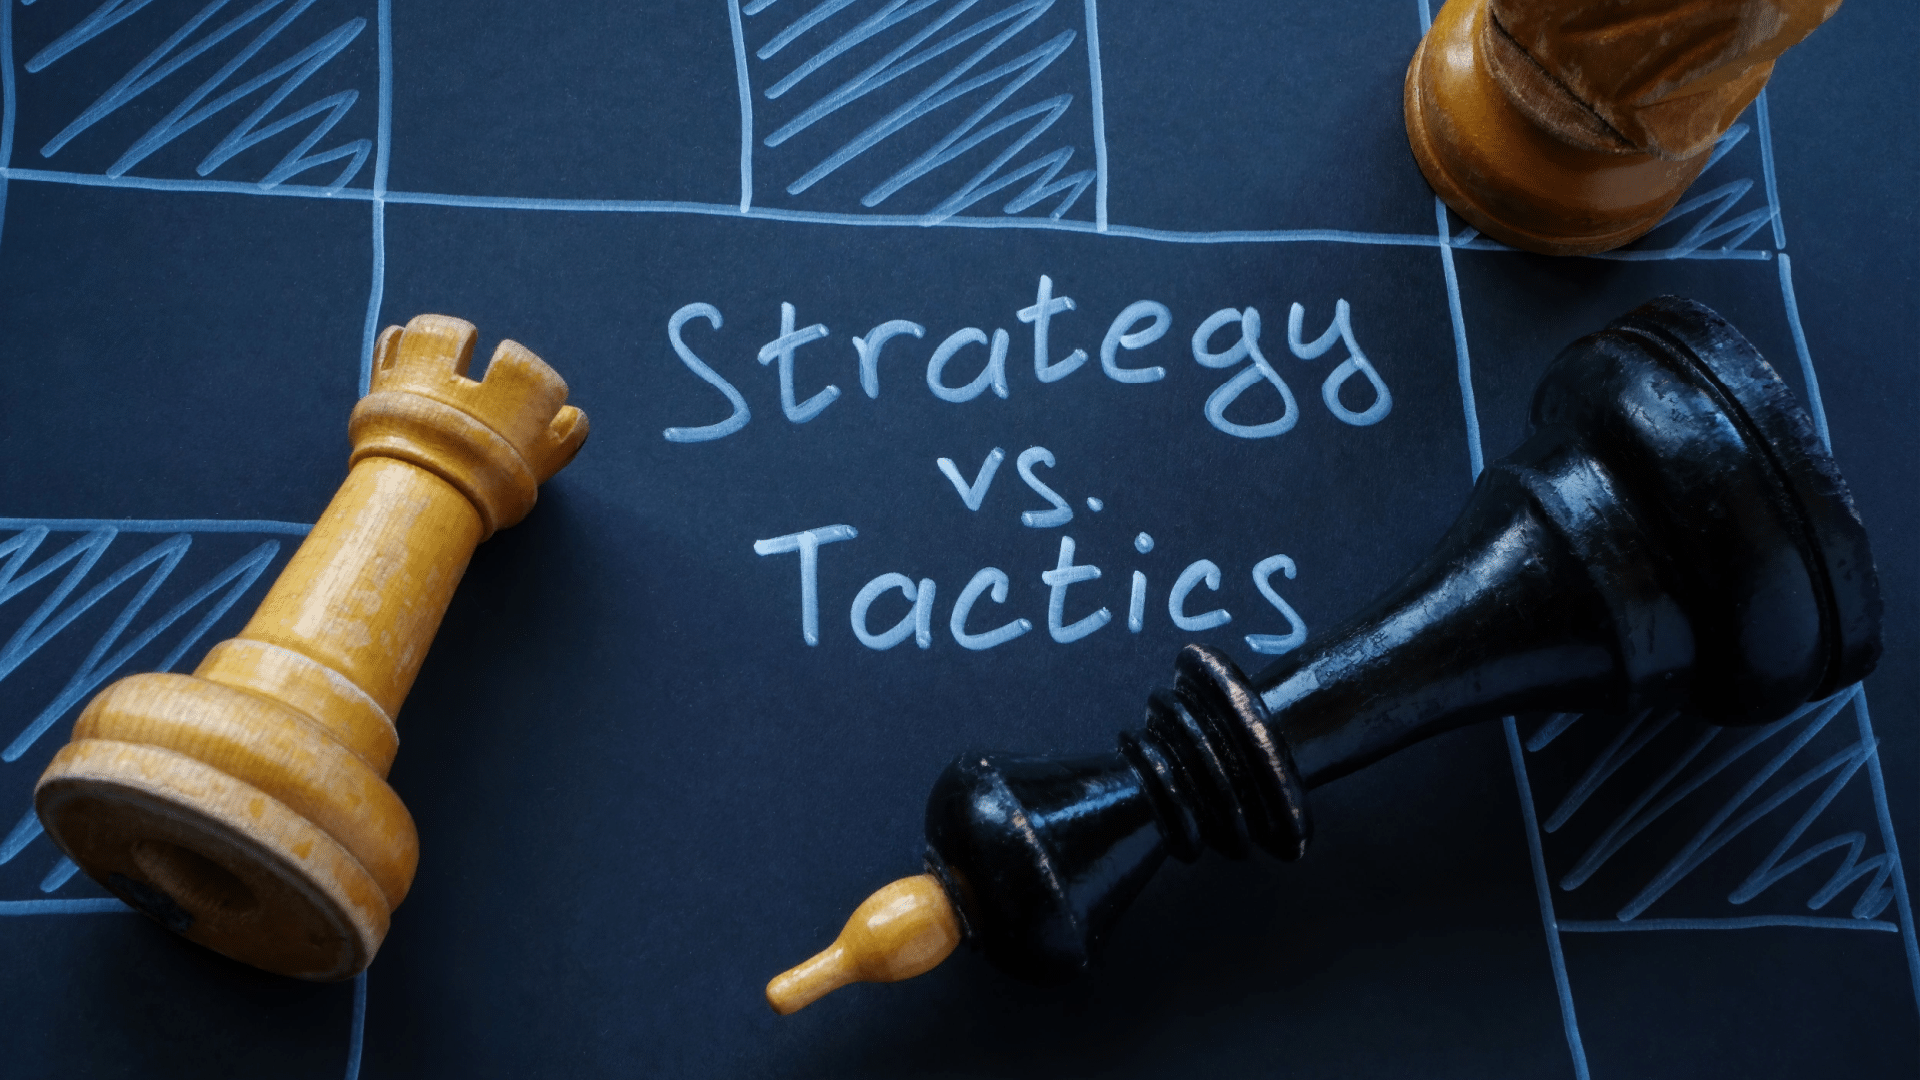 What is strategic PR and how is it different from tactical PR?